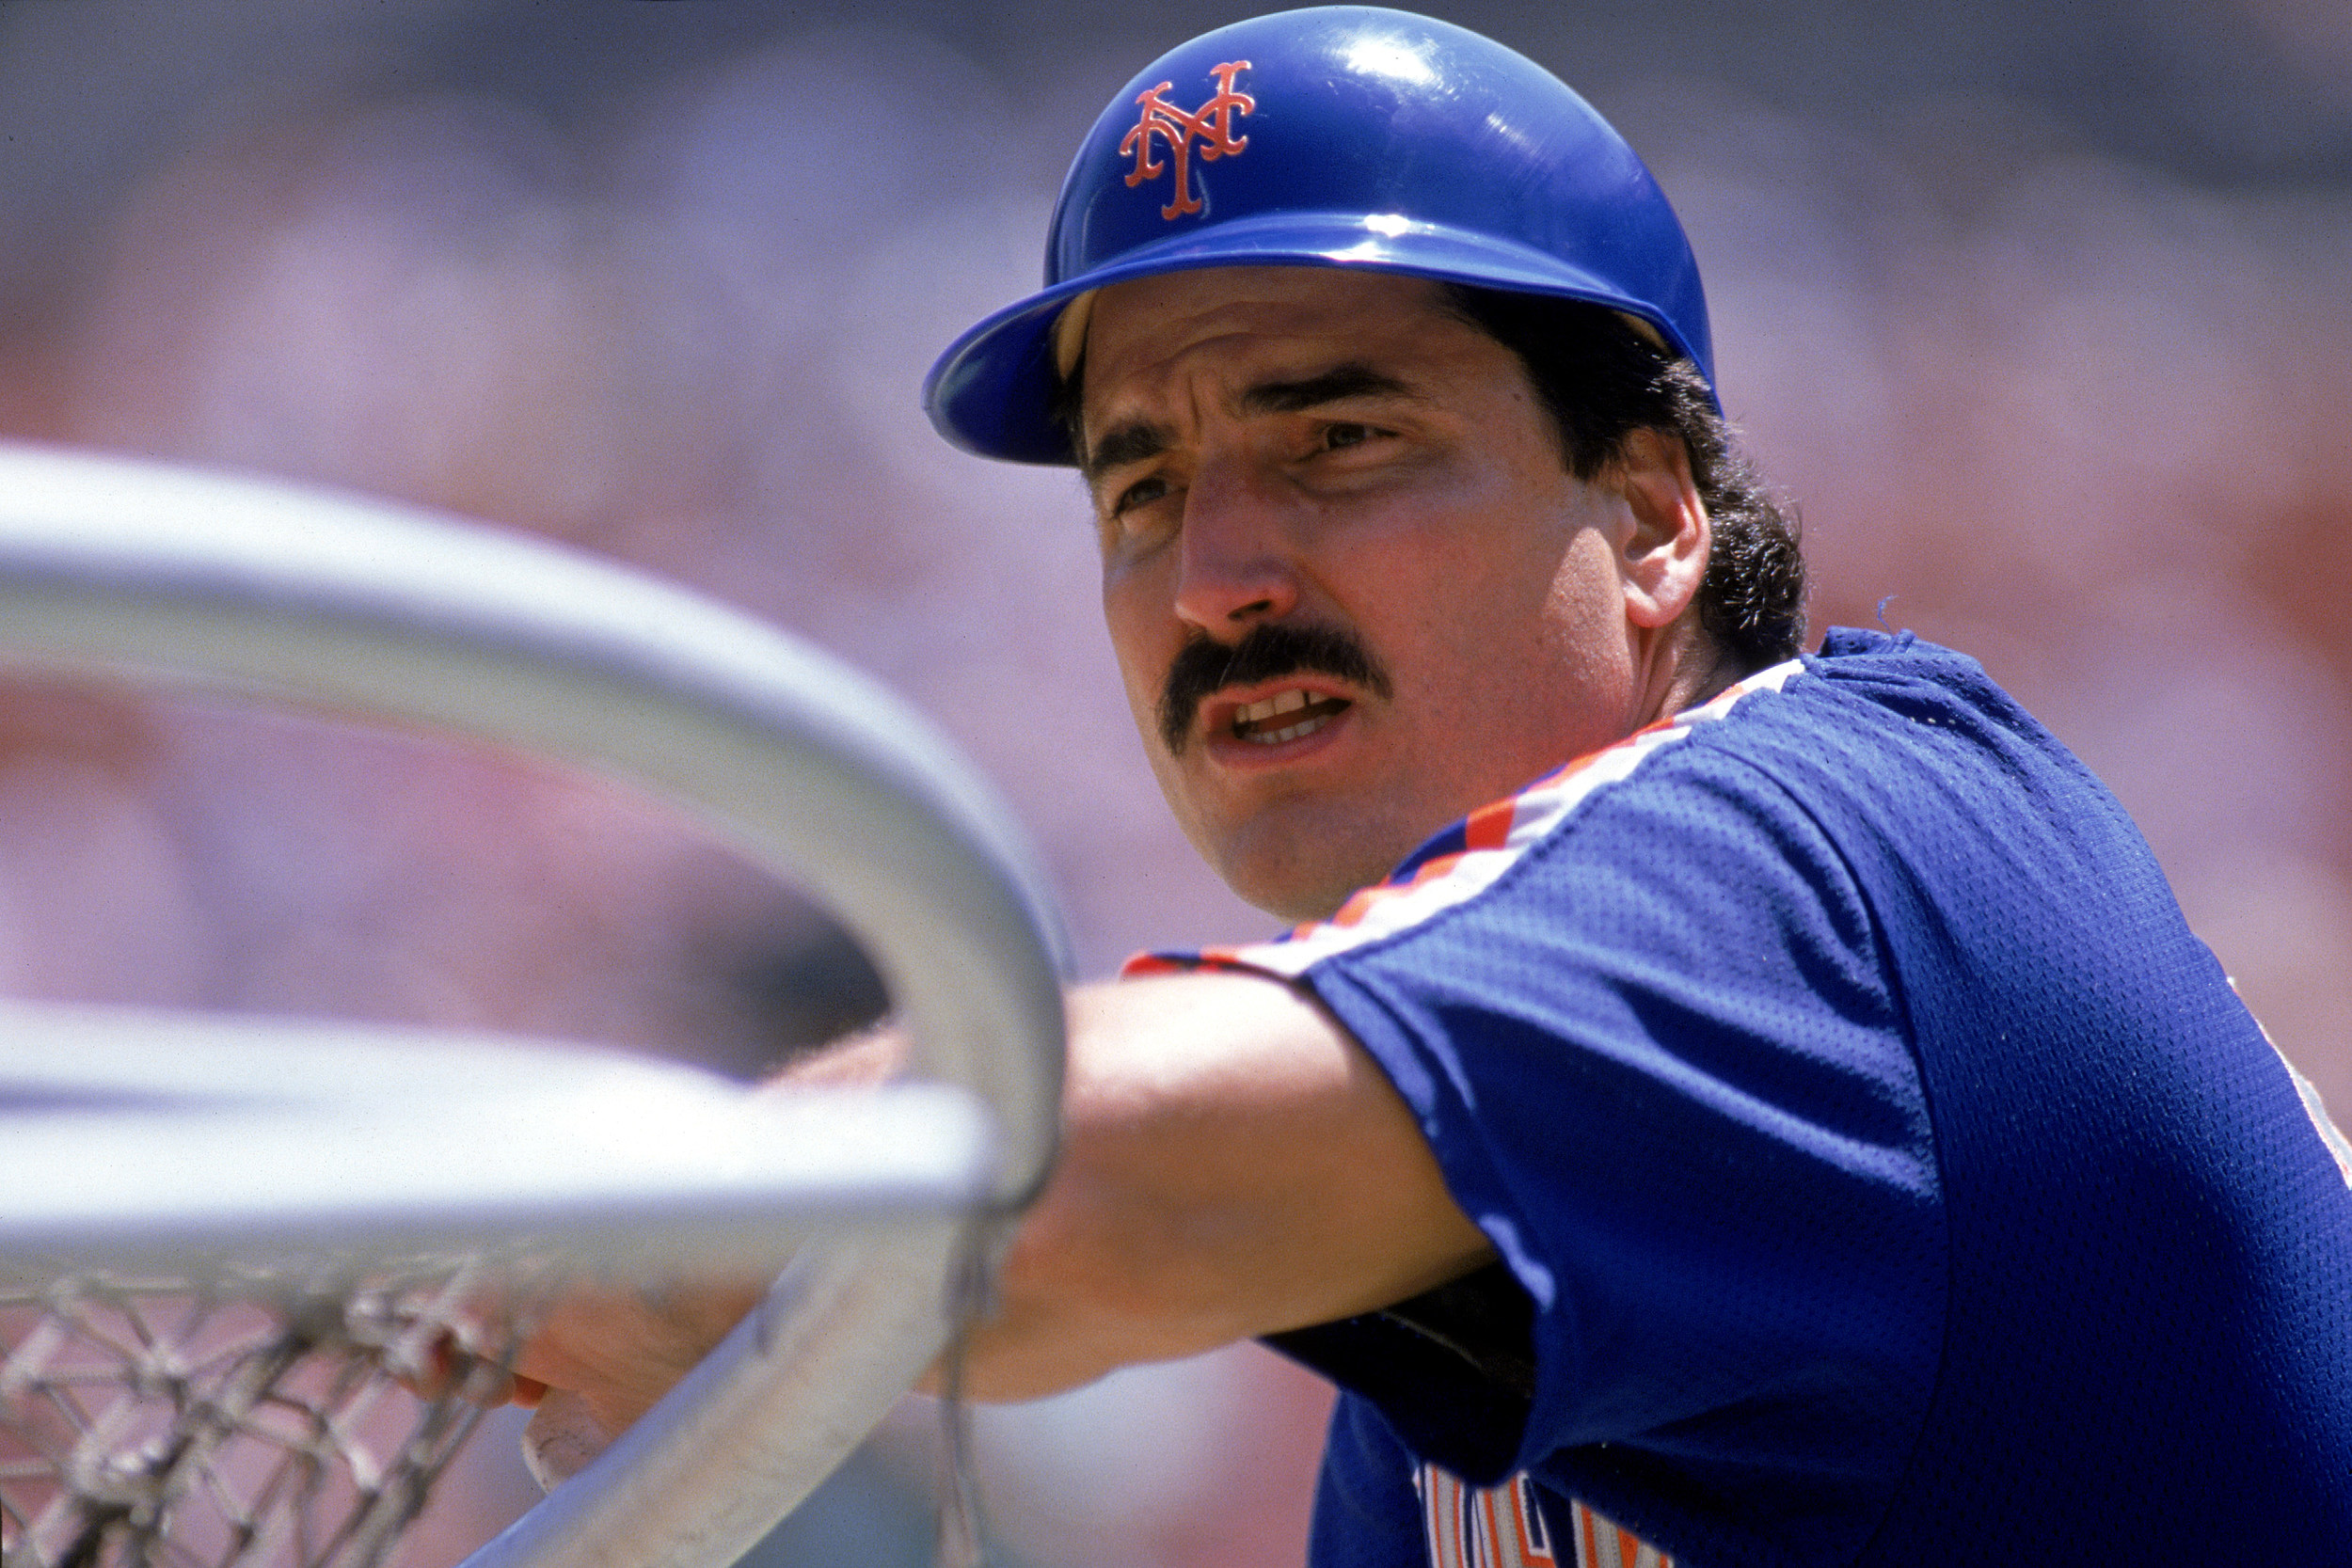 How Keith Hernandez Changed The 1980s Mets